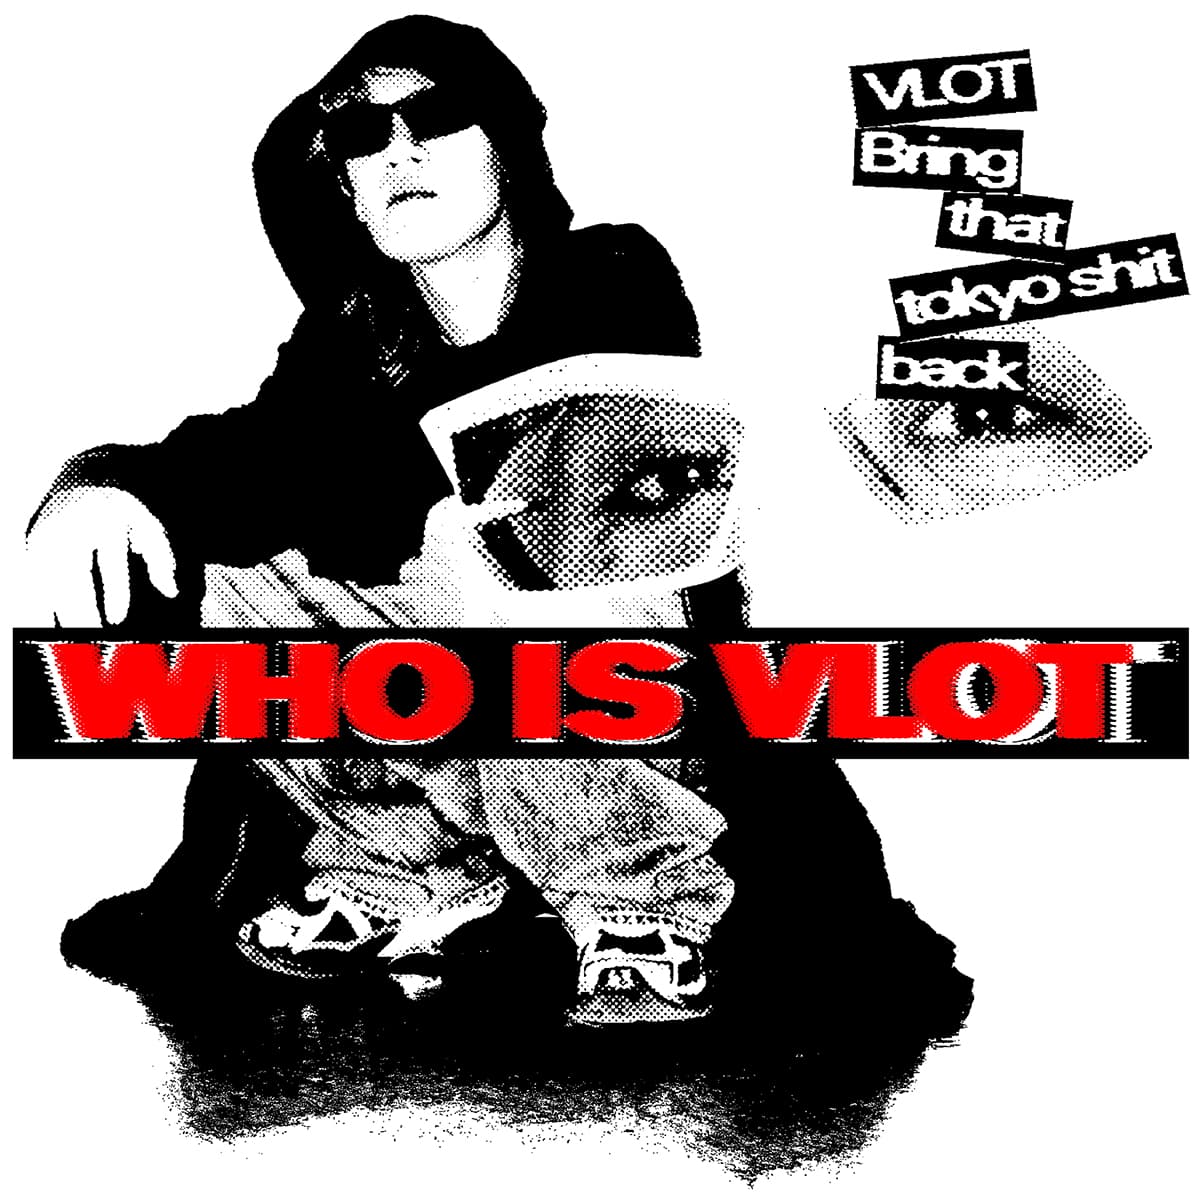 WHO IS VLOT(Complete Edition)